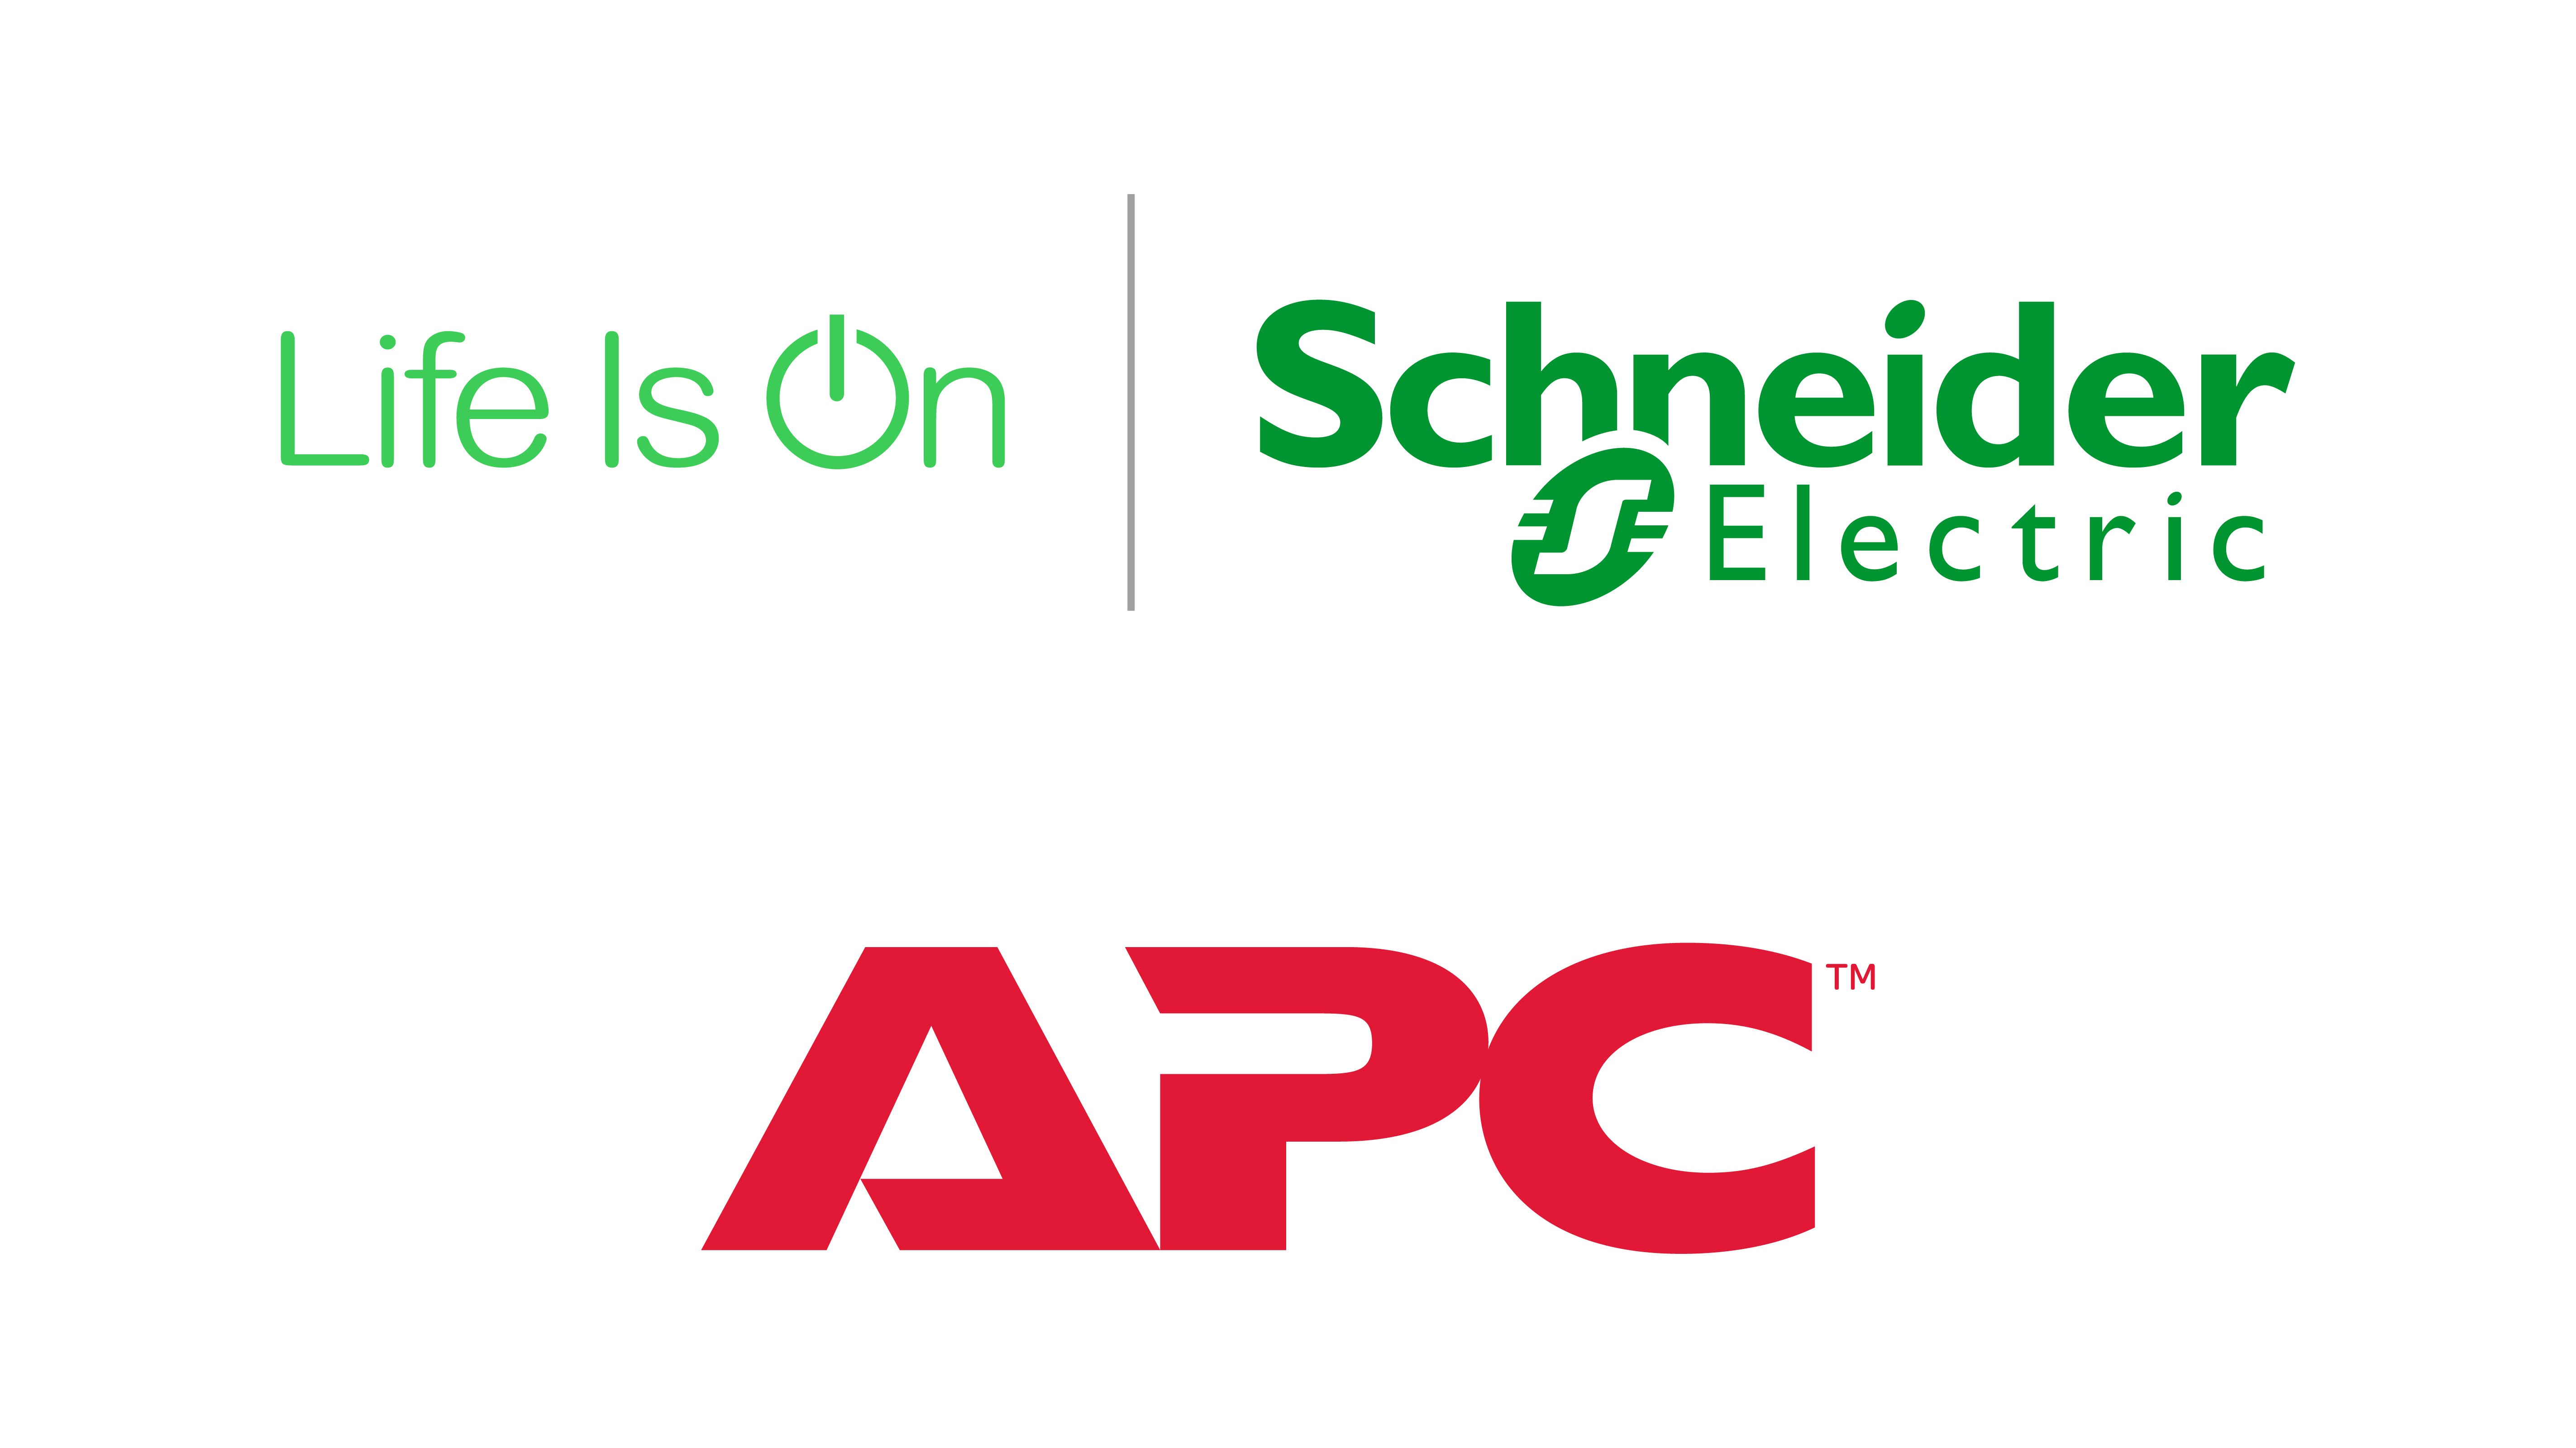 APC by Schneider Electric UPS - Power Solutions